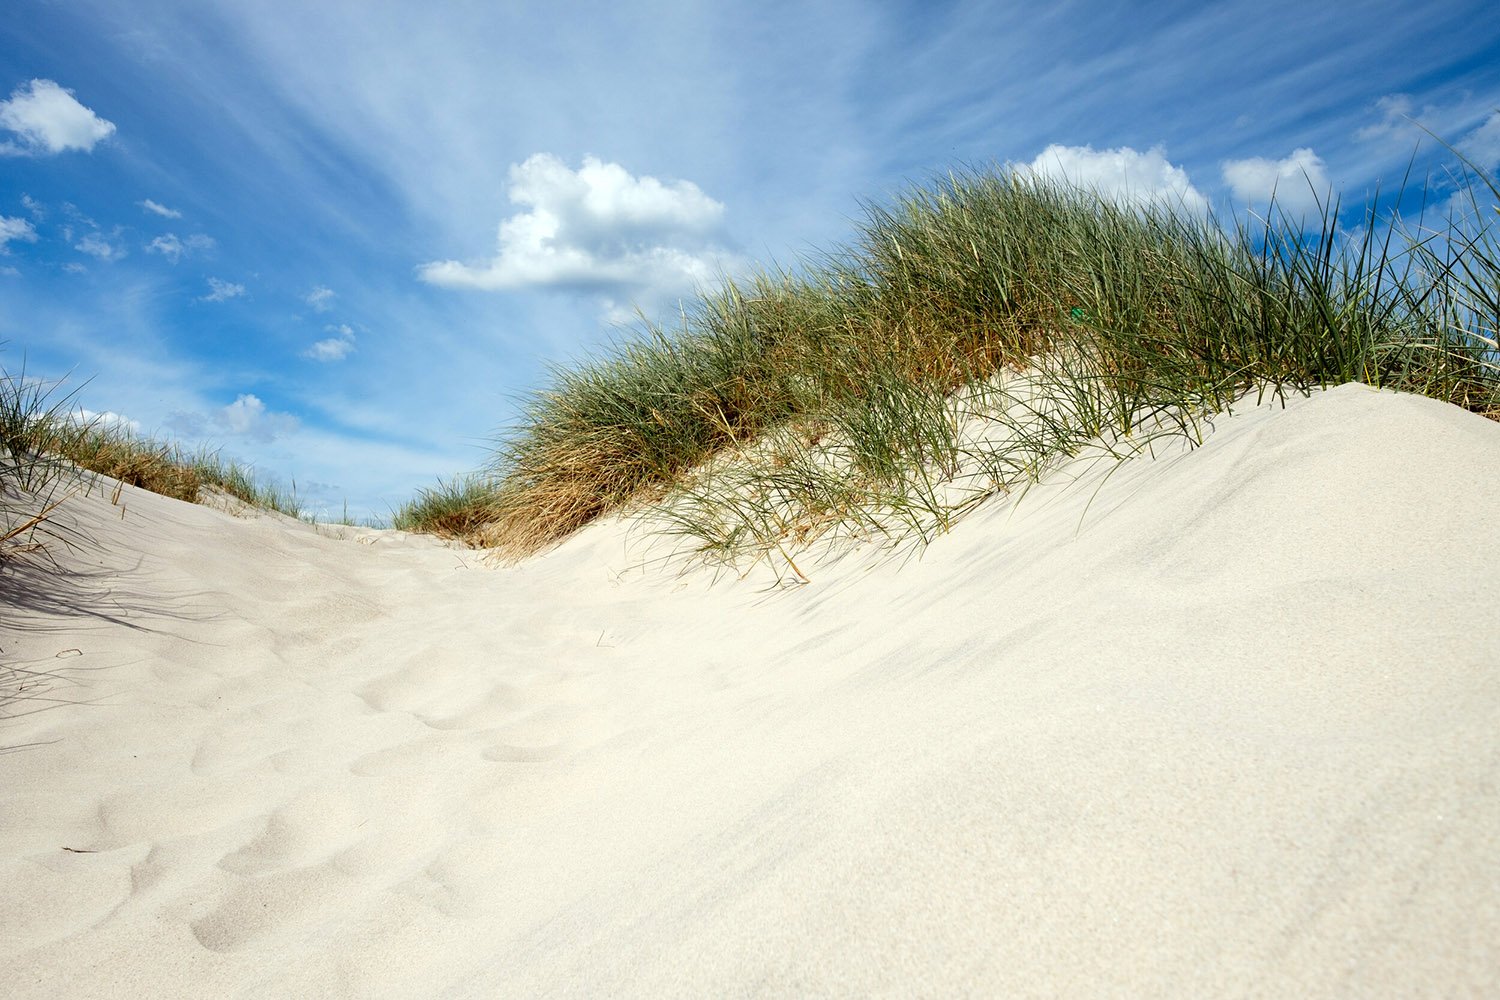 I used to play in sand dunes like these as a kid